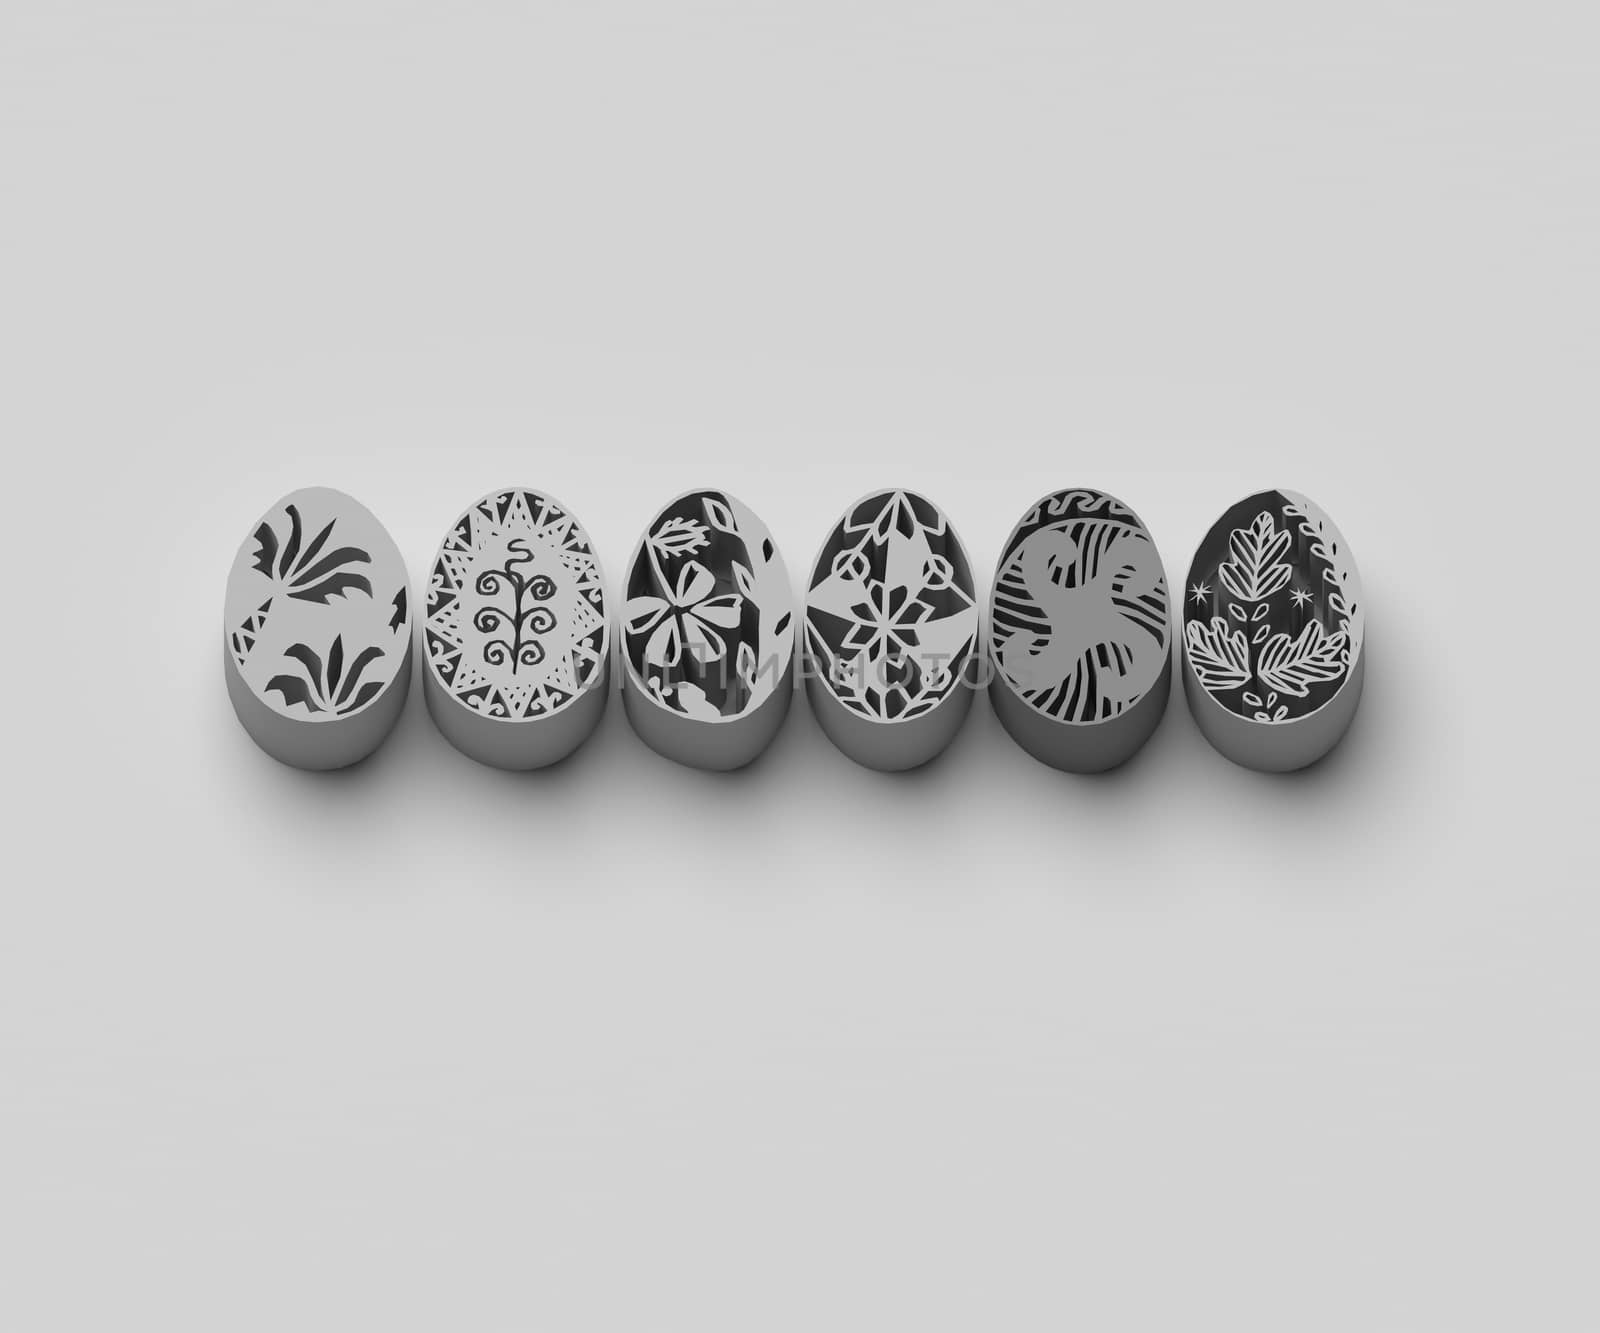 BLACK AND WHITE PHOTO OF 3D EXTRUDED EASTER EGGS ON PLAIN BACKGROUND